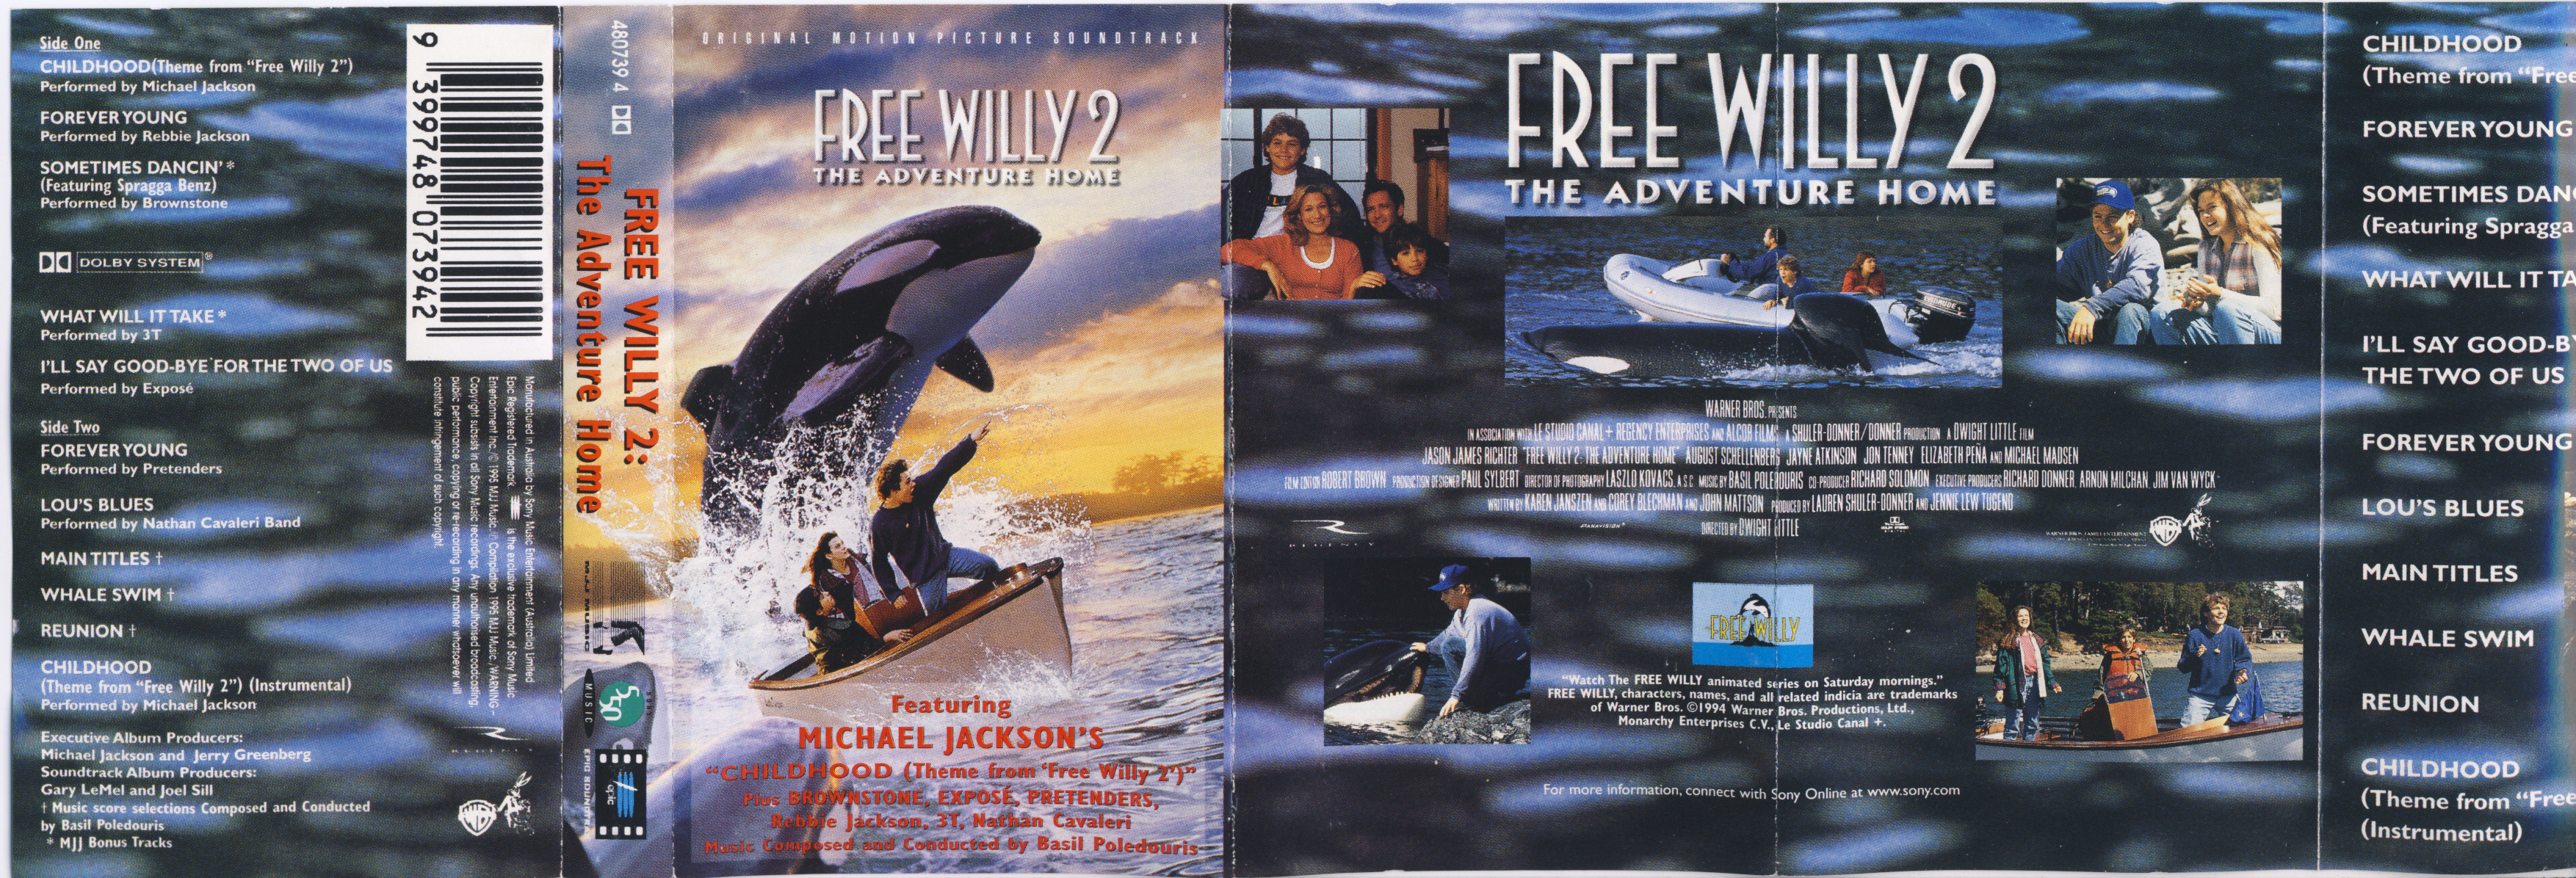 Free Willy-1995-II-soundtrack audiocassette.jpg